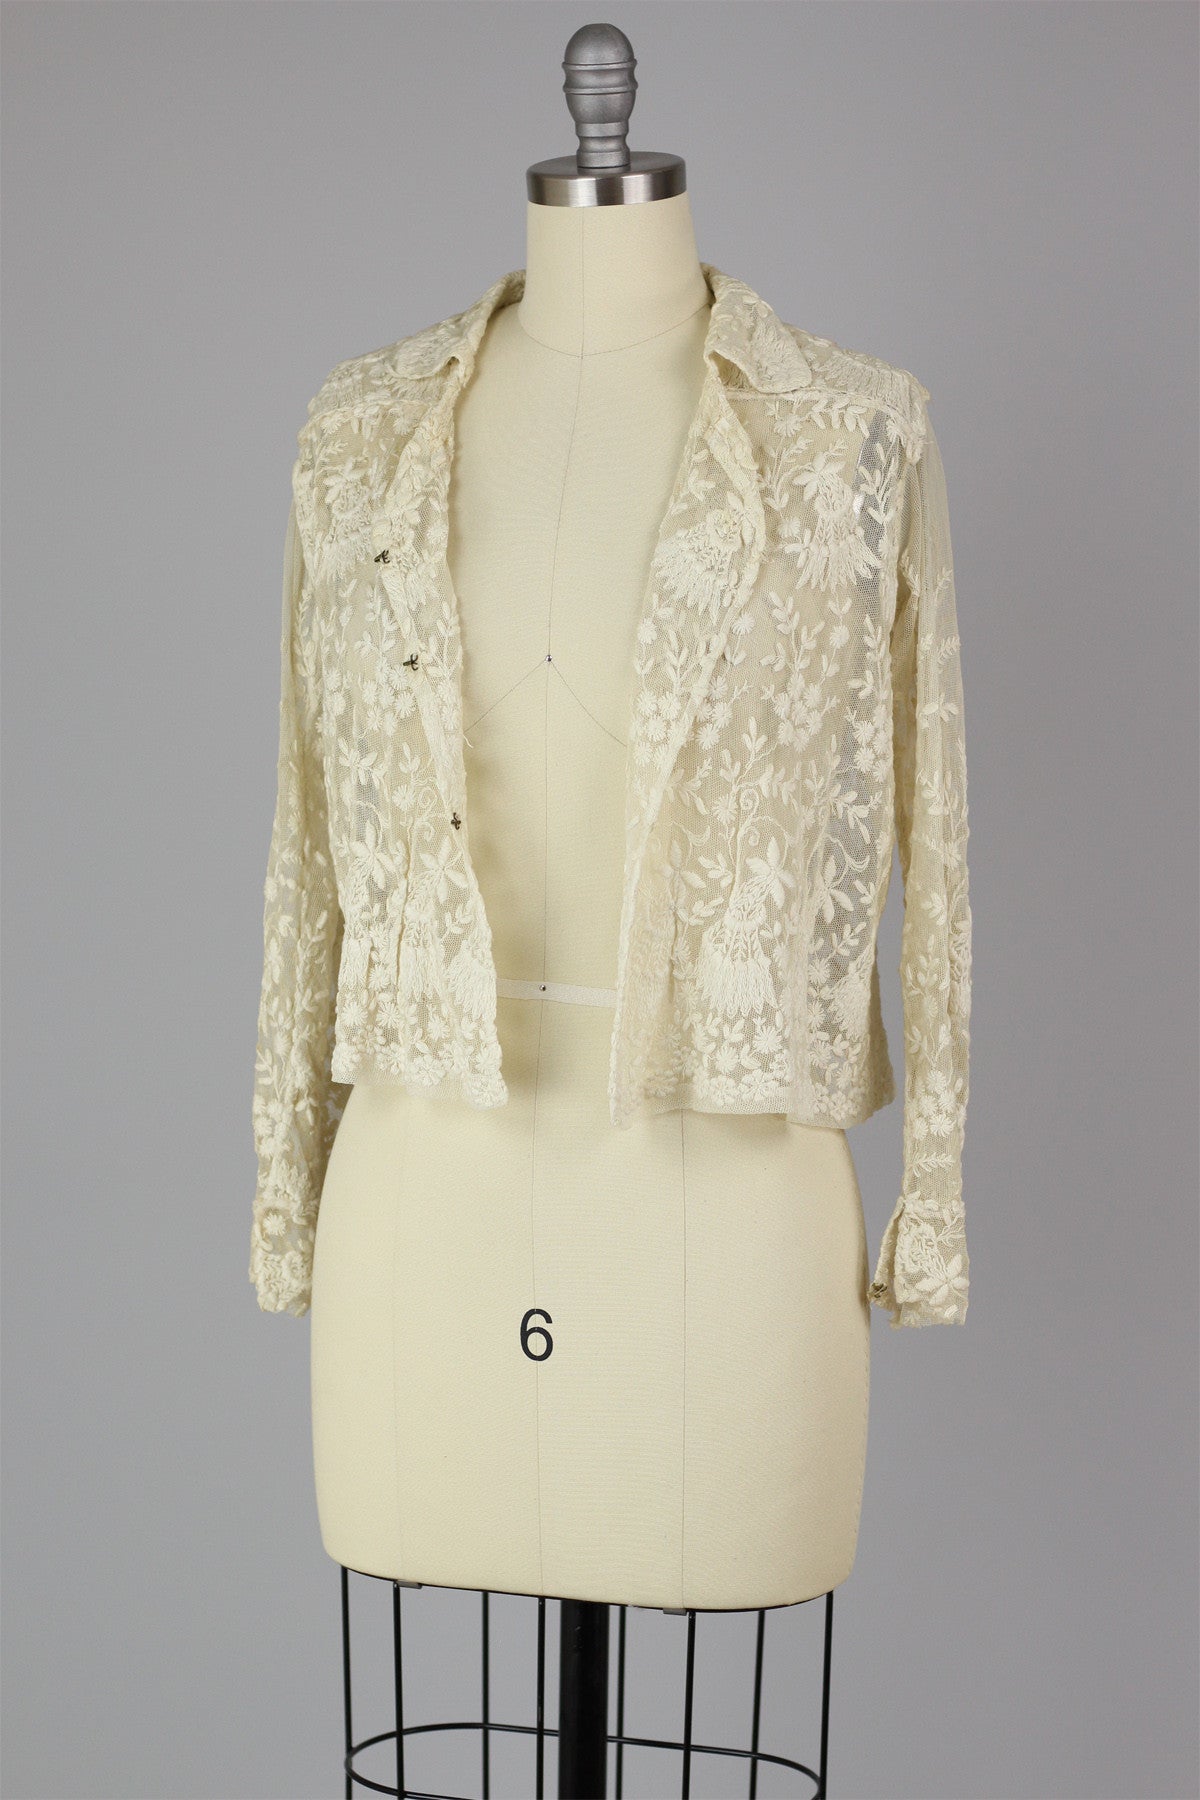 1920s Antique French Lace Jacket with Tambour Embroidery